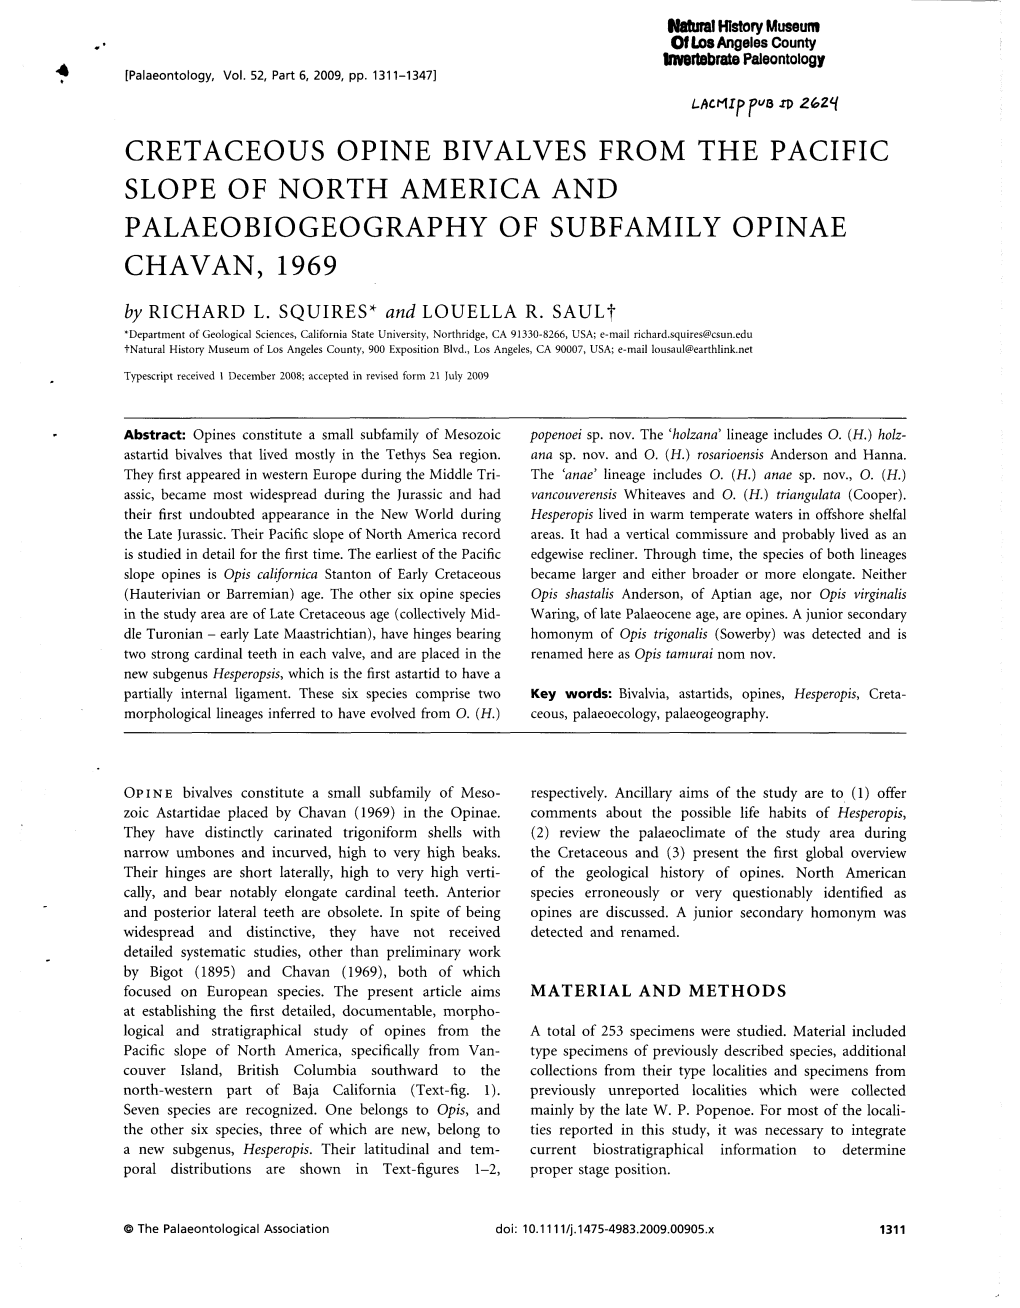 CRETACEOUS OPINE BIVALVES from the PACIFIC SLOPE of NORTH AMERICA and PALAEOBIOGEOGRAPHY of SUBFAMILY OPINAE CHAVAN, 1969 by RICHARD L